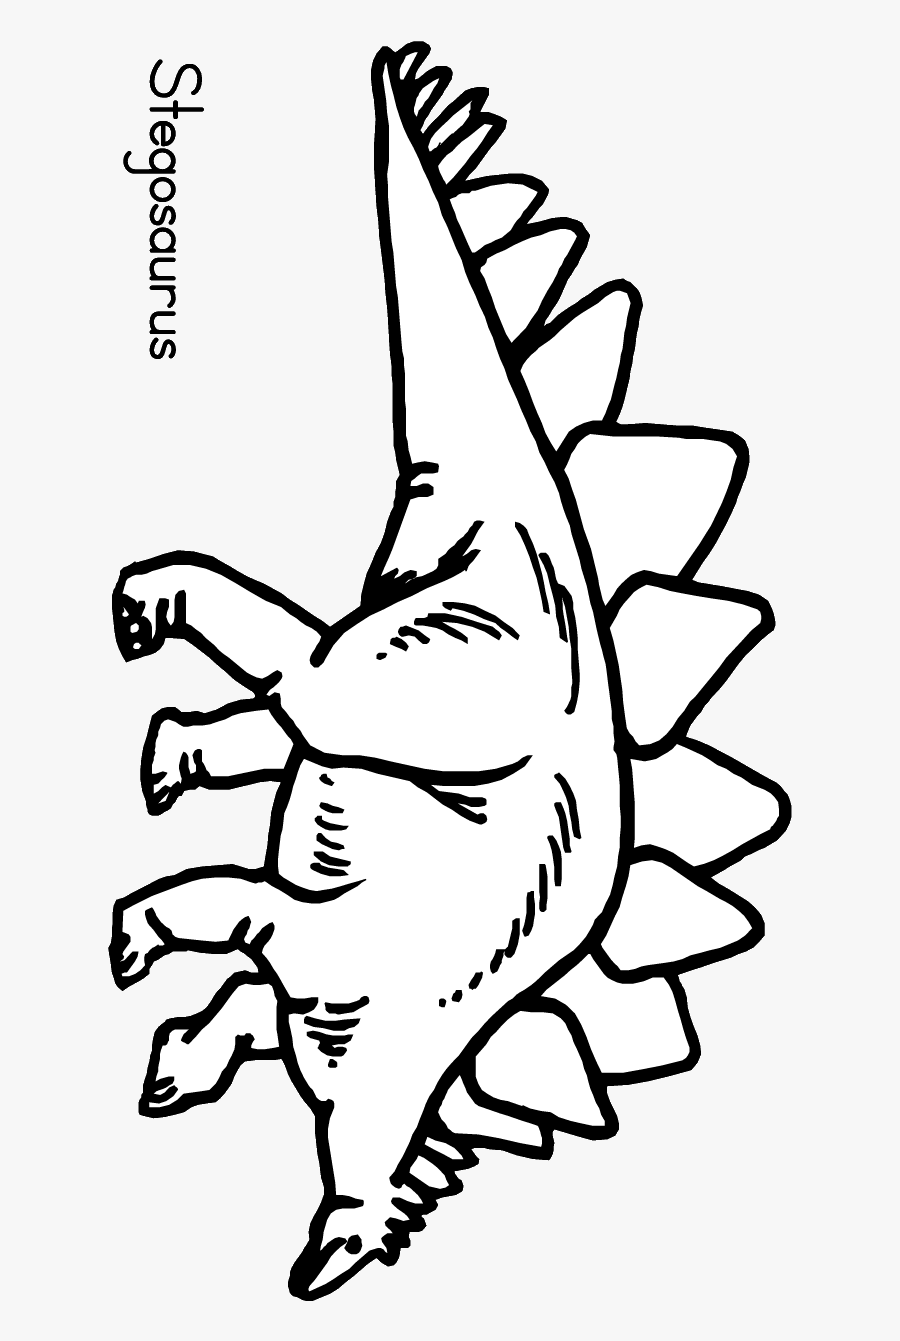 Fossil Colouring Sheet Frames Illustrations Hd Images - Dinosaur Coloring Pages Free, Transparent Clipart